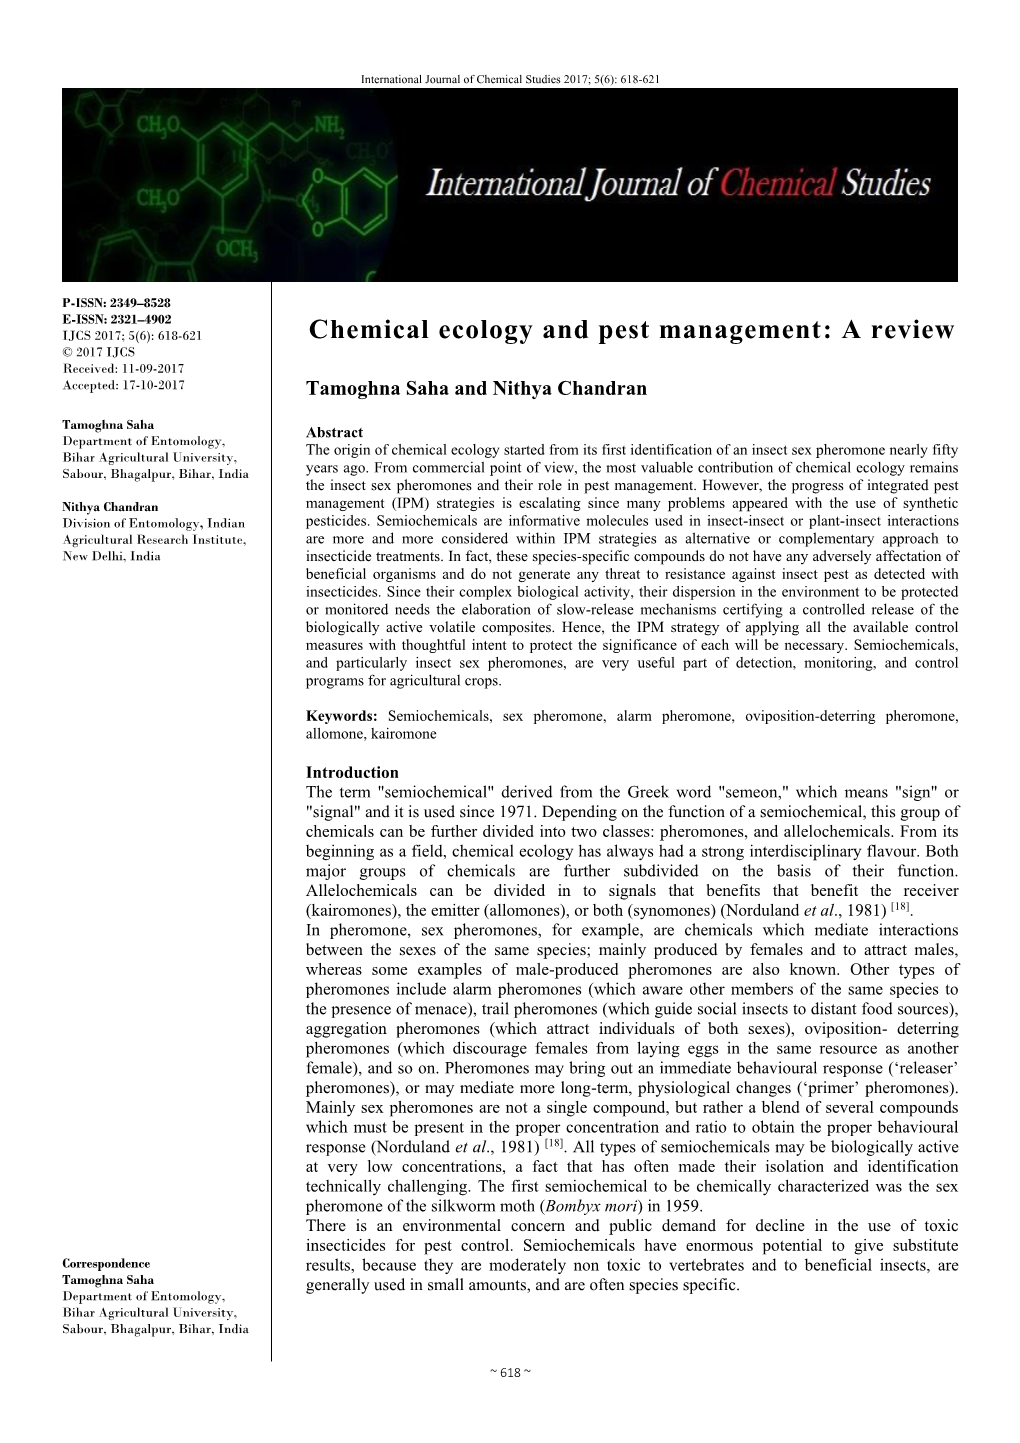 Chemical Ecology and Pest Management: a Review © 2017 IJCS Received: 11-09-2017 Accepted: 17-10-2017 Tamoghna Saha and Nithya Chandran